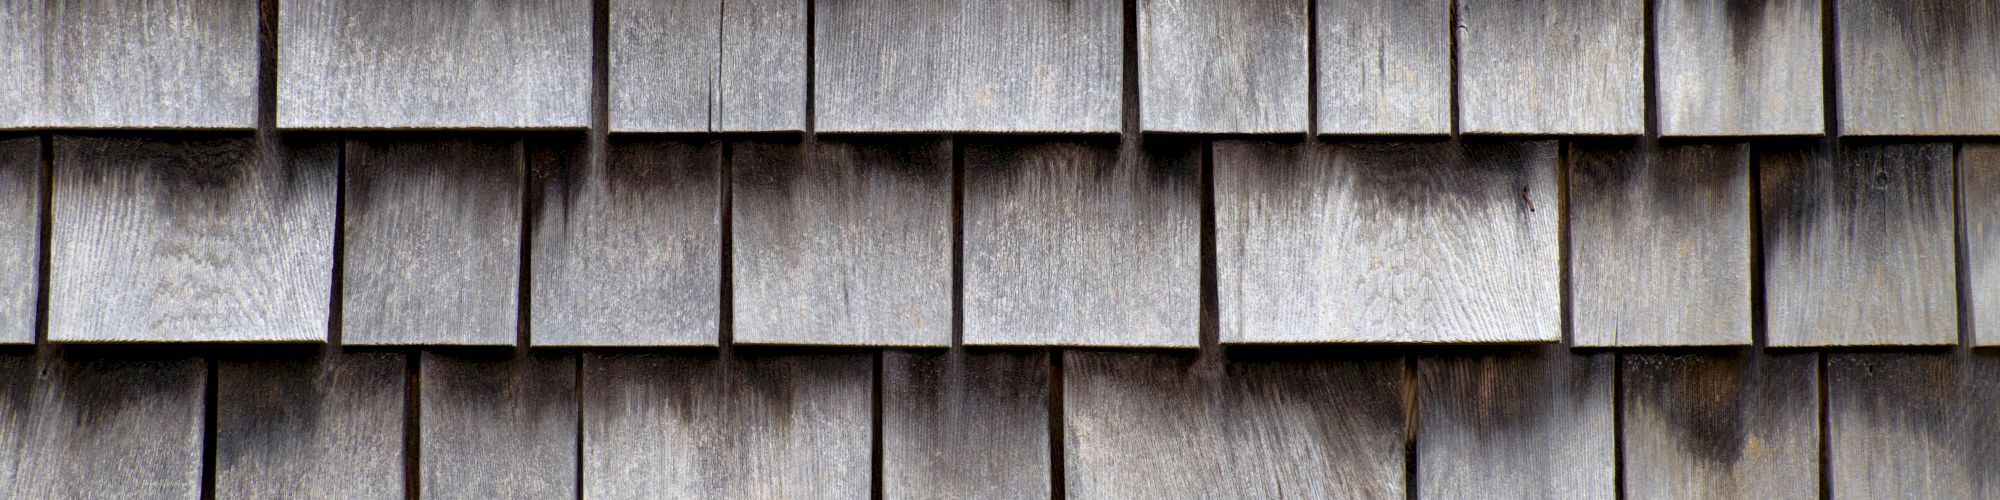 The image shows a close-up of a wall with wooden shingles, arranged in overlapping rows to create a textured surface.